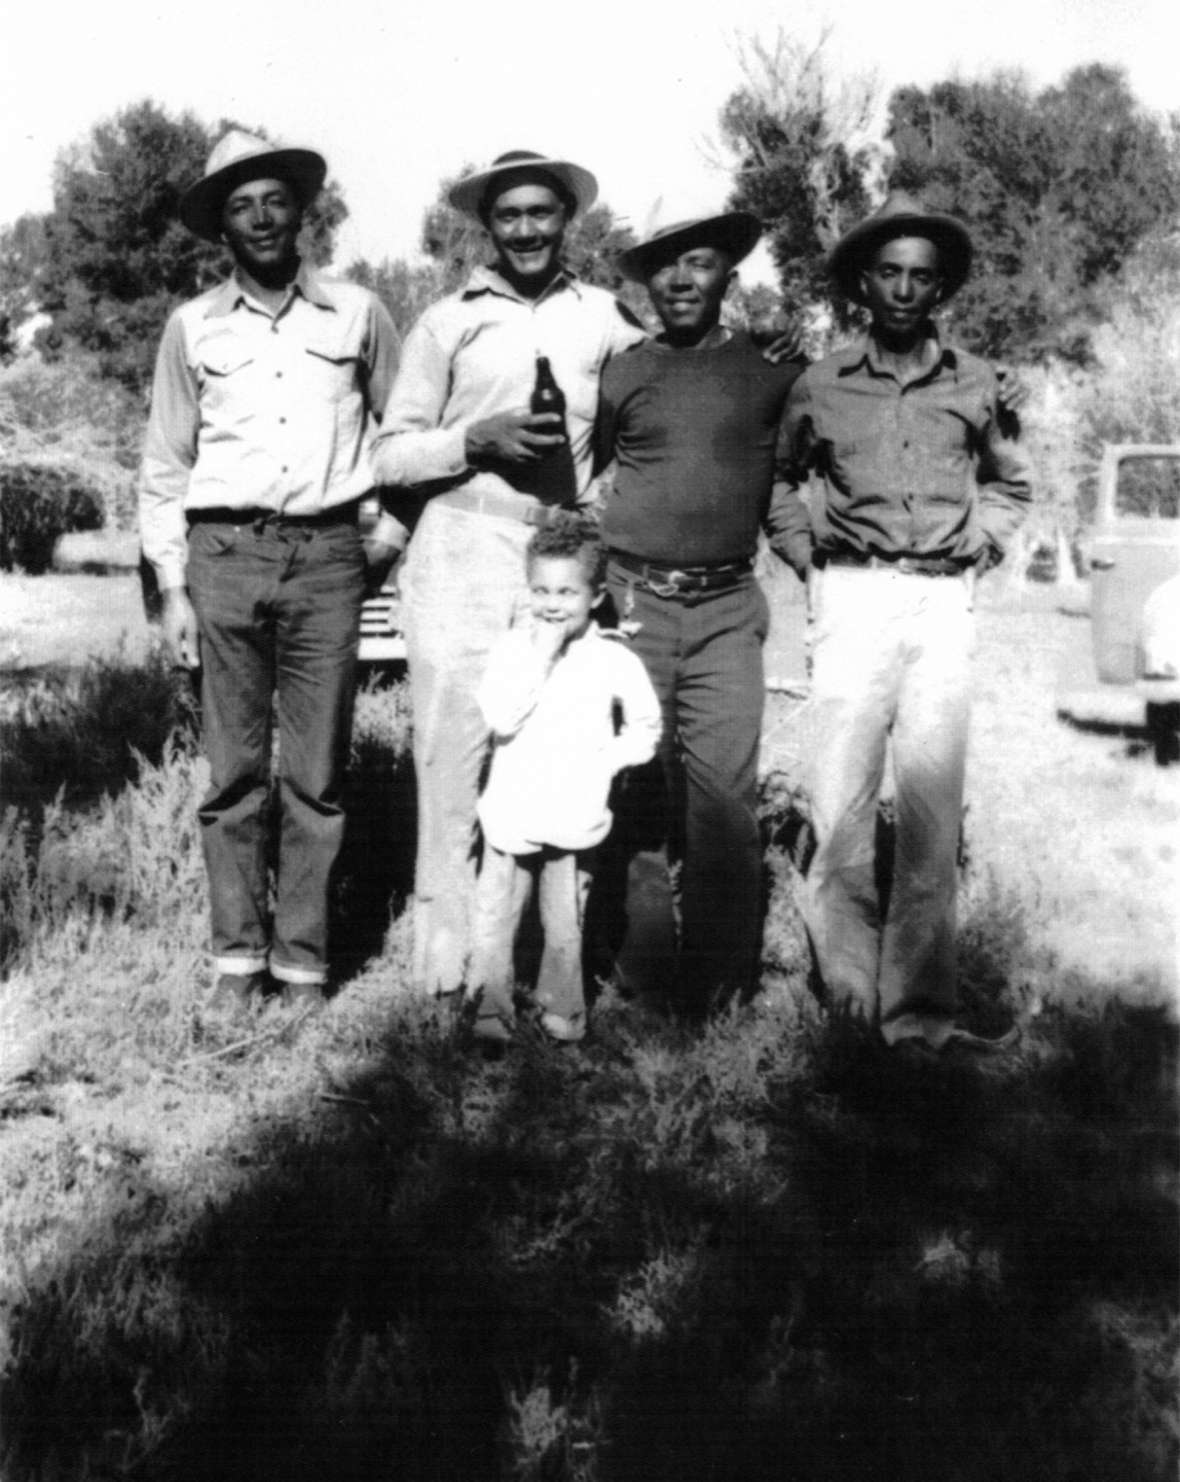 Left to right, Bill Stepp, brother-in-law Ed Steward, John and Horace Greeley “Dutch” Stepp; Dutch’s son Gary in front. Bill, John and Dutch were sons of Lon Stepp. Around 1950. Stepp family photo.